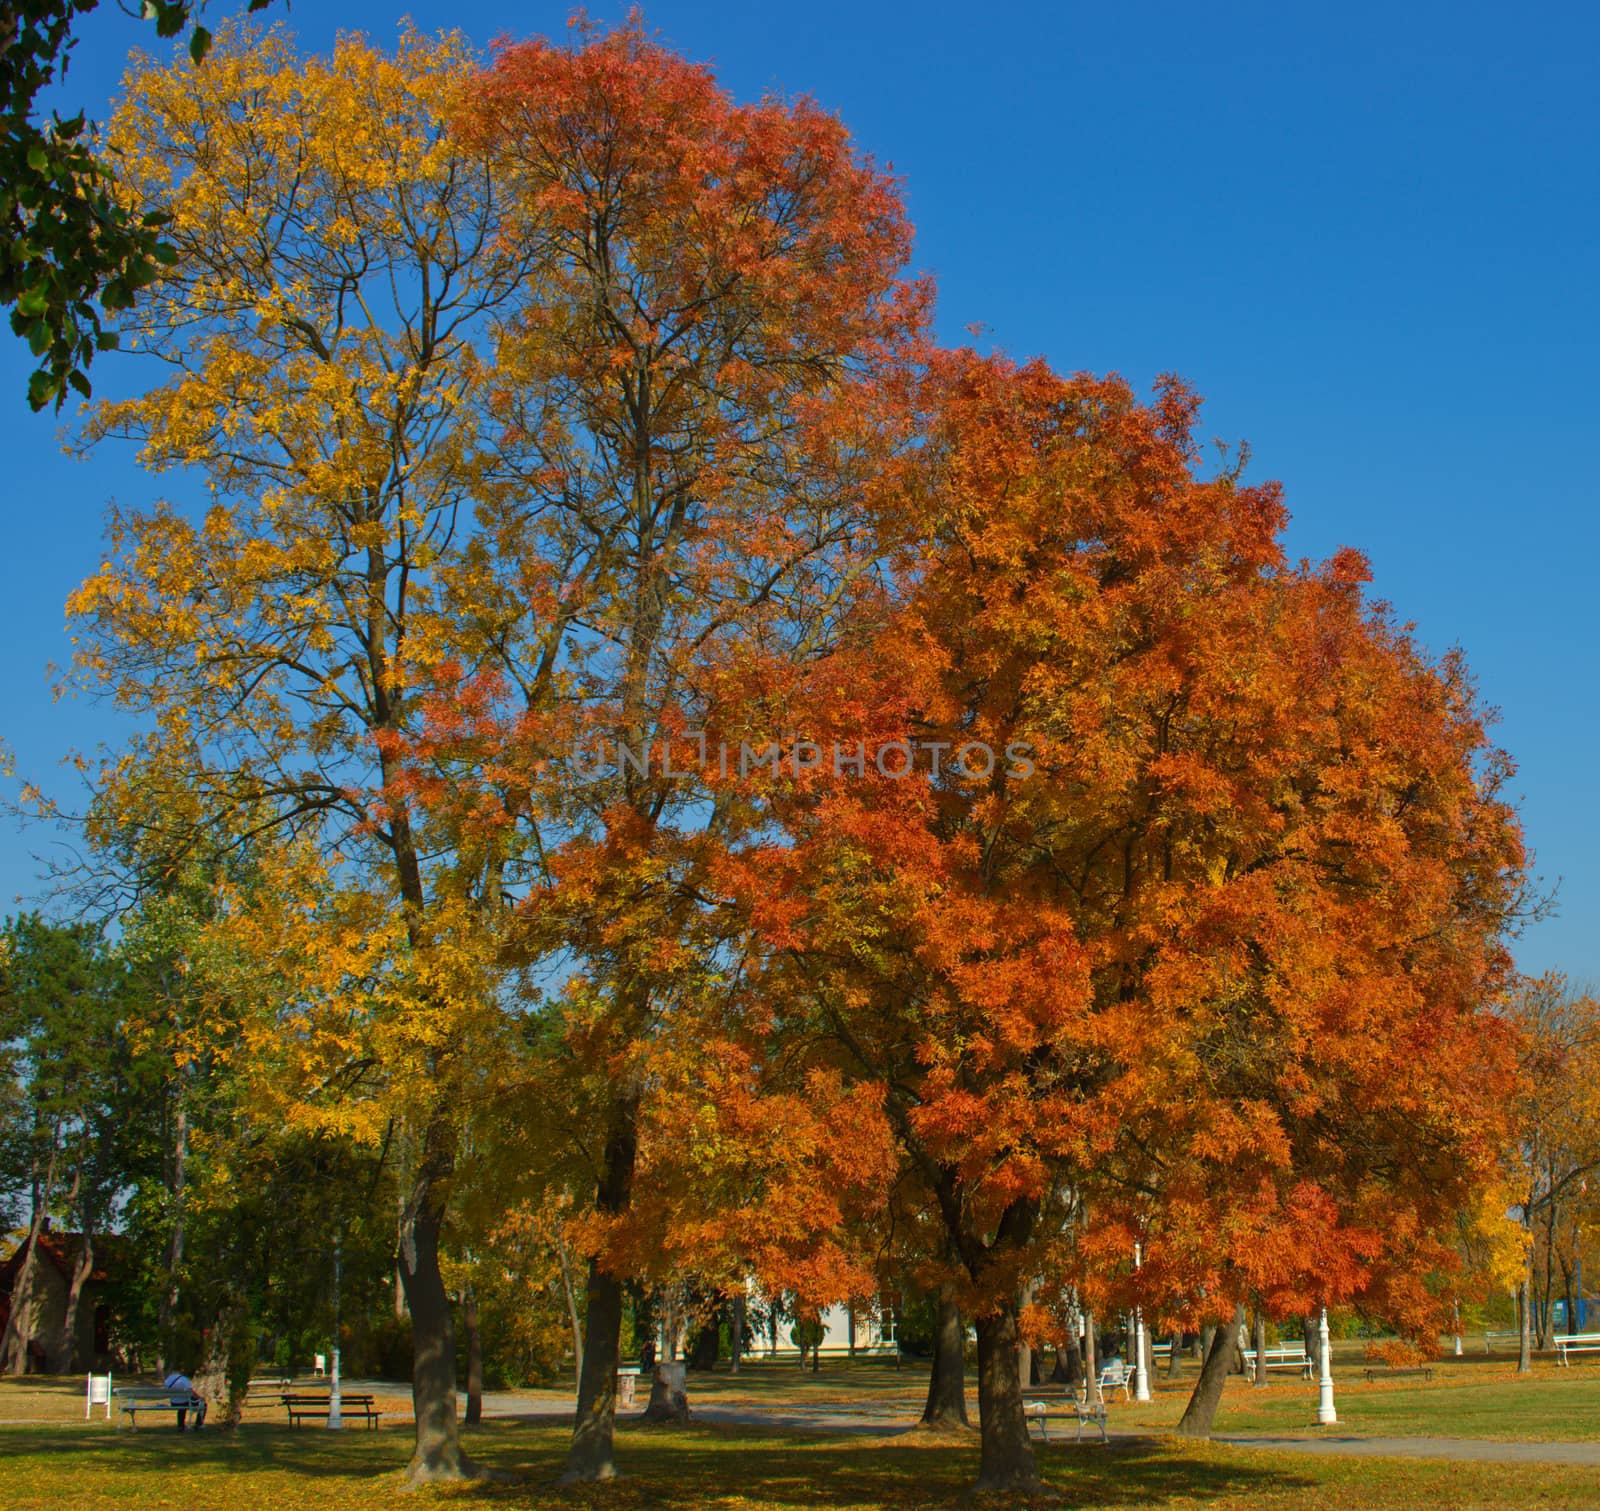 Several trees in park with vibrant colored leaves during autumn time by sheriffkule